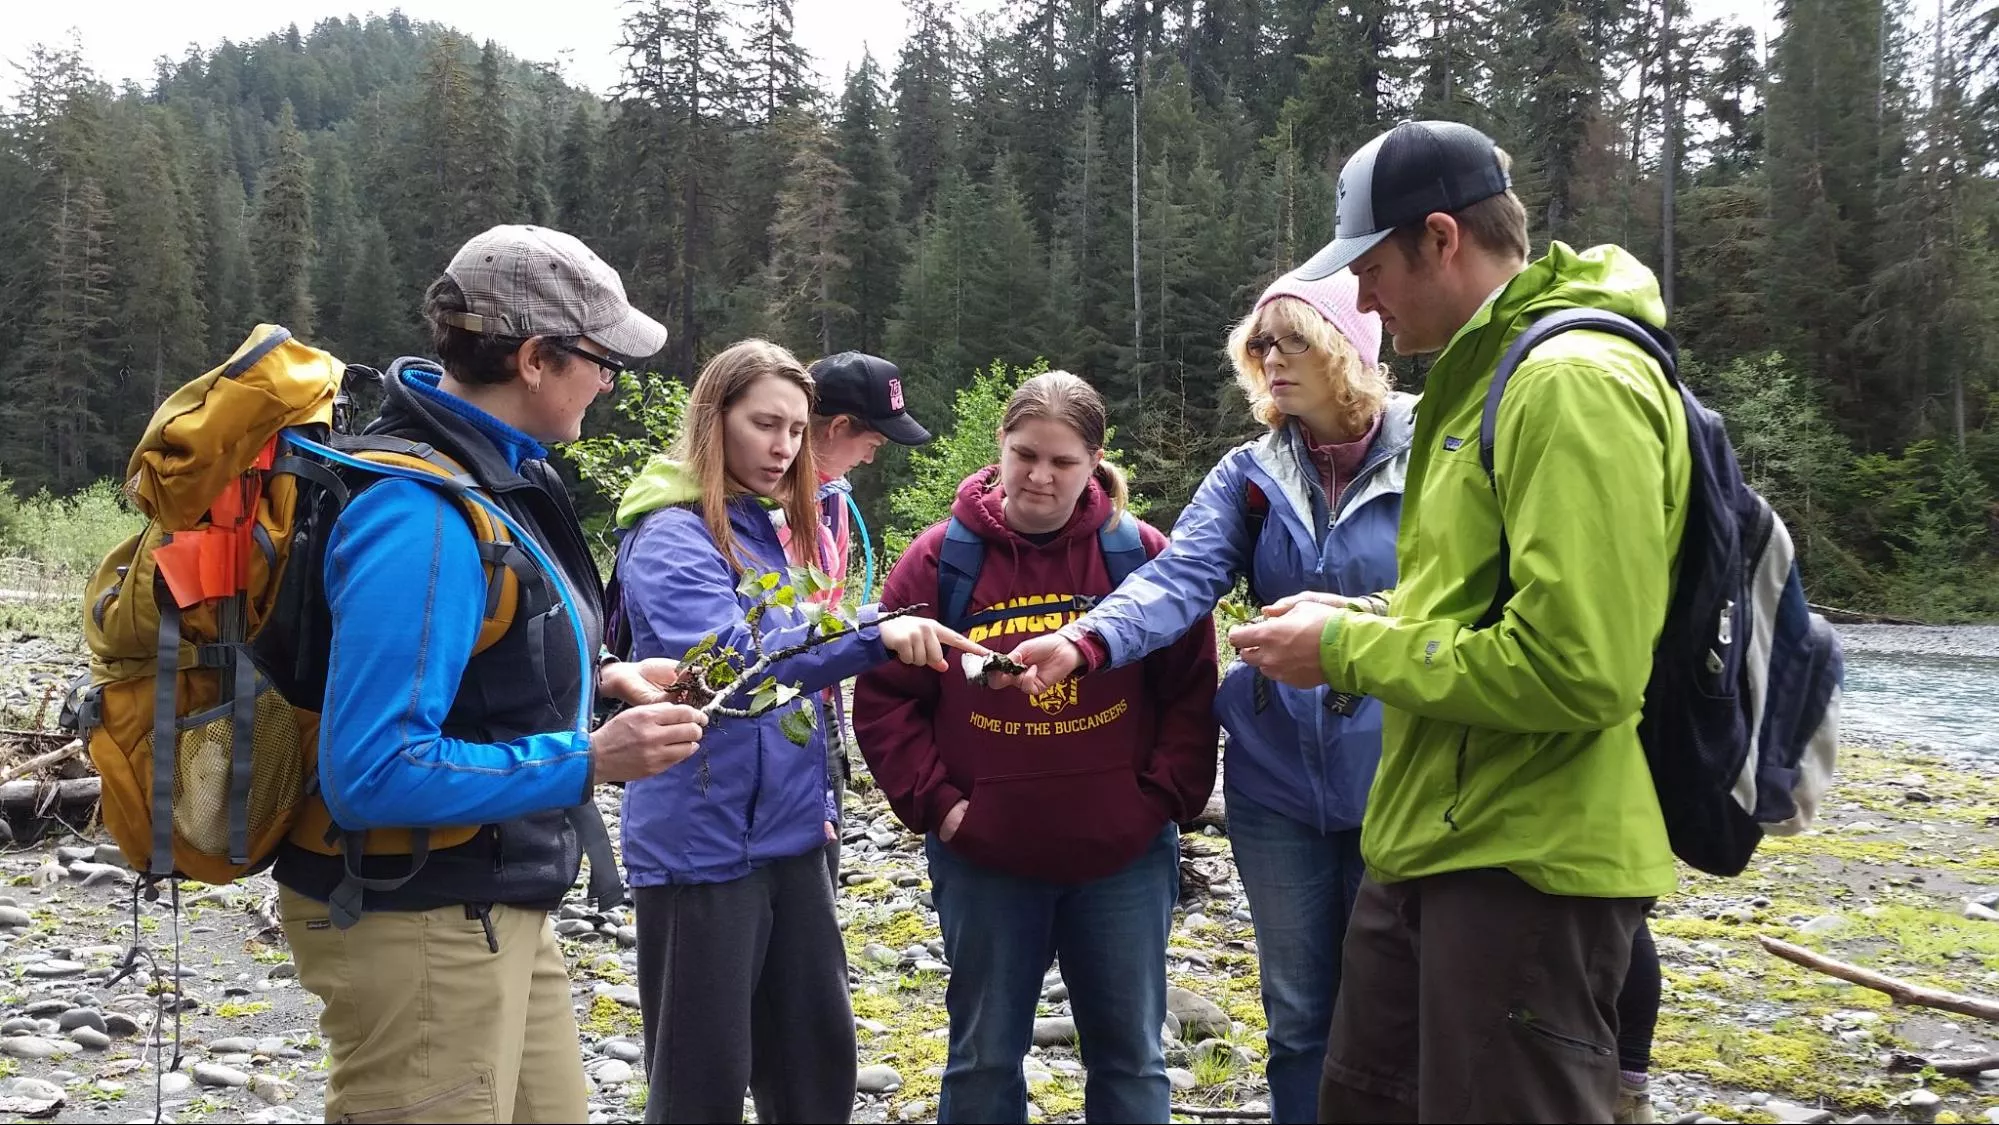 Group of students standing by a river investigating and discussing branch samples